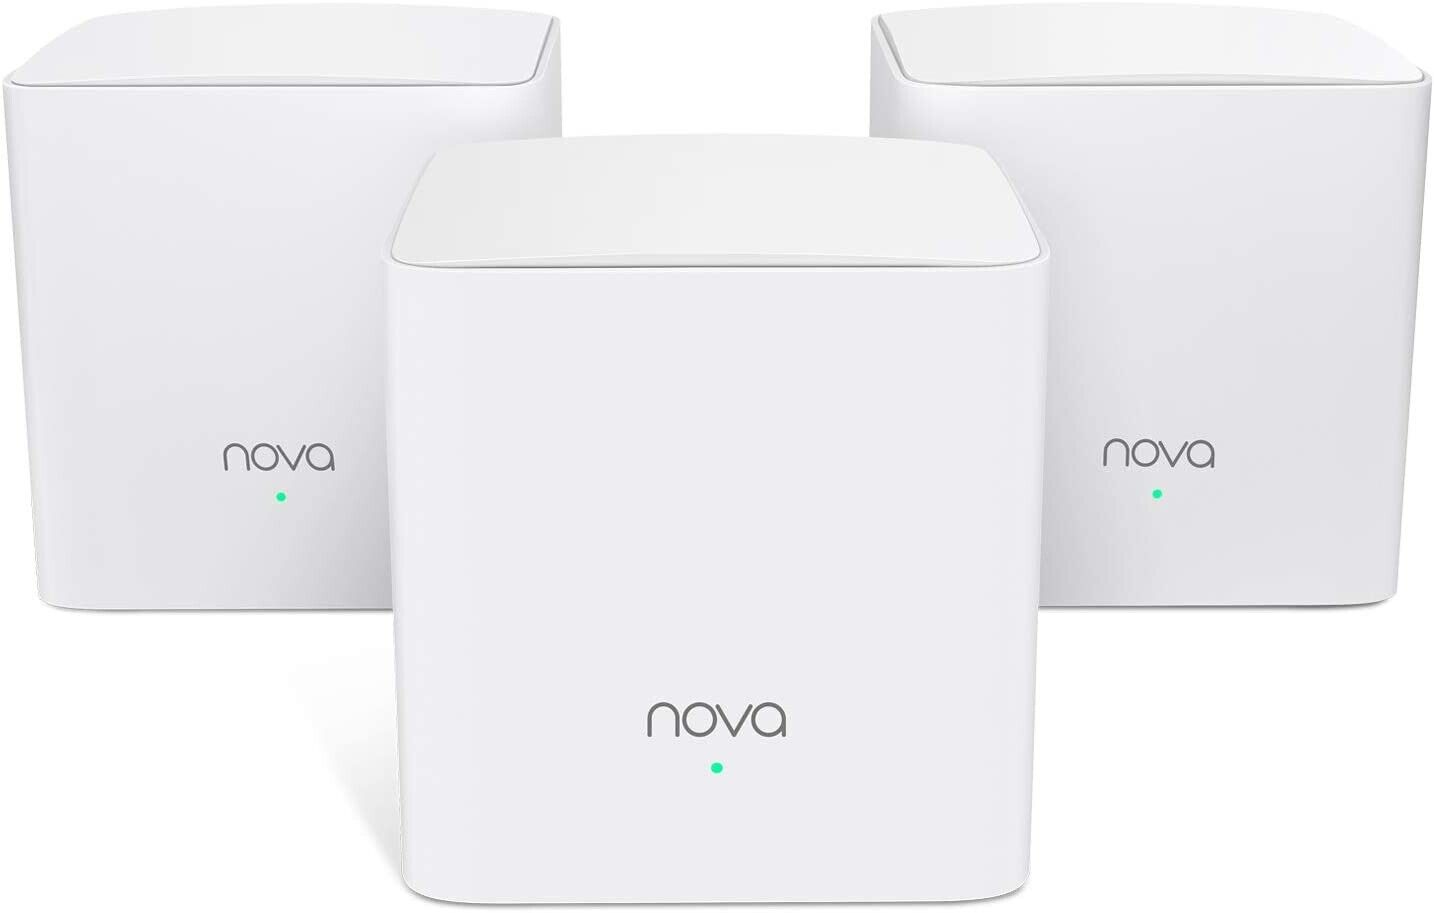 Tenda NOVA Whole Home Mesh WiFi System - Replaces Gigabit AC WiFi Router and Ext